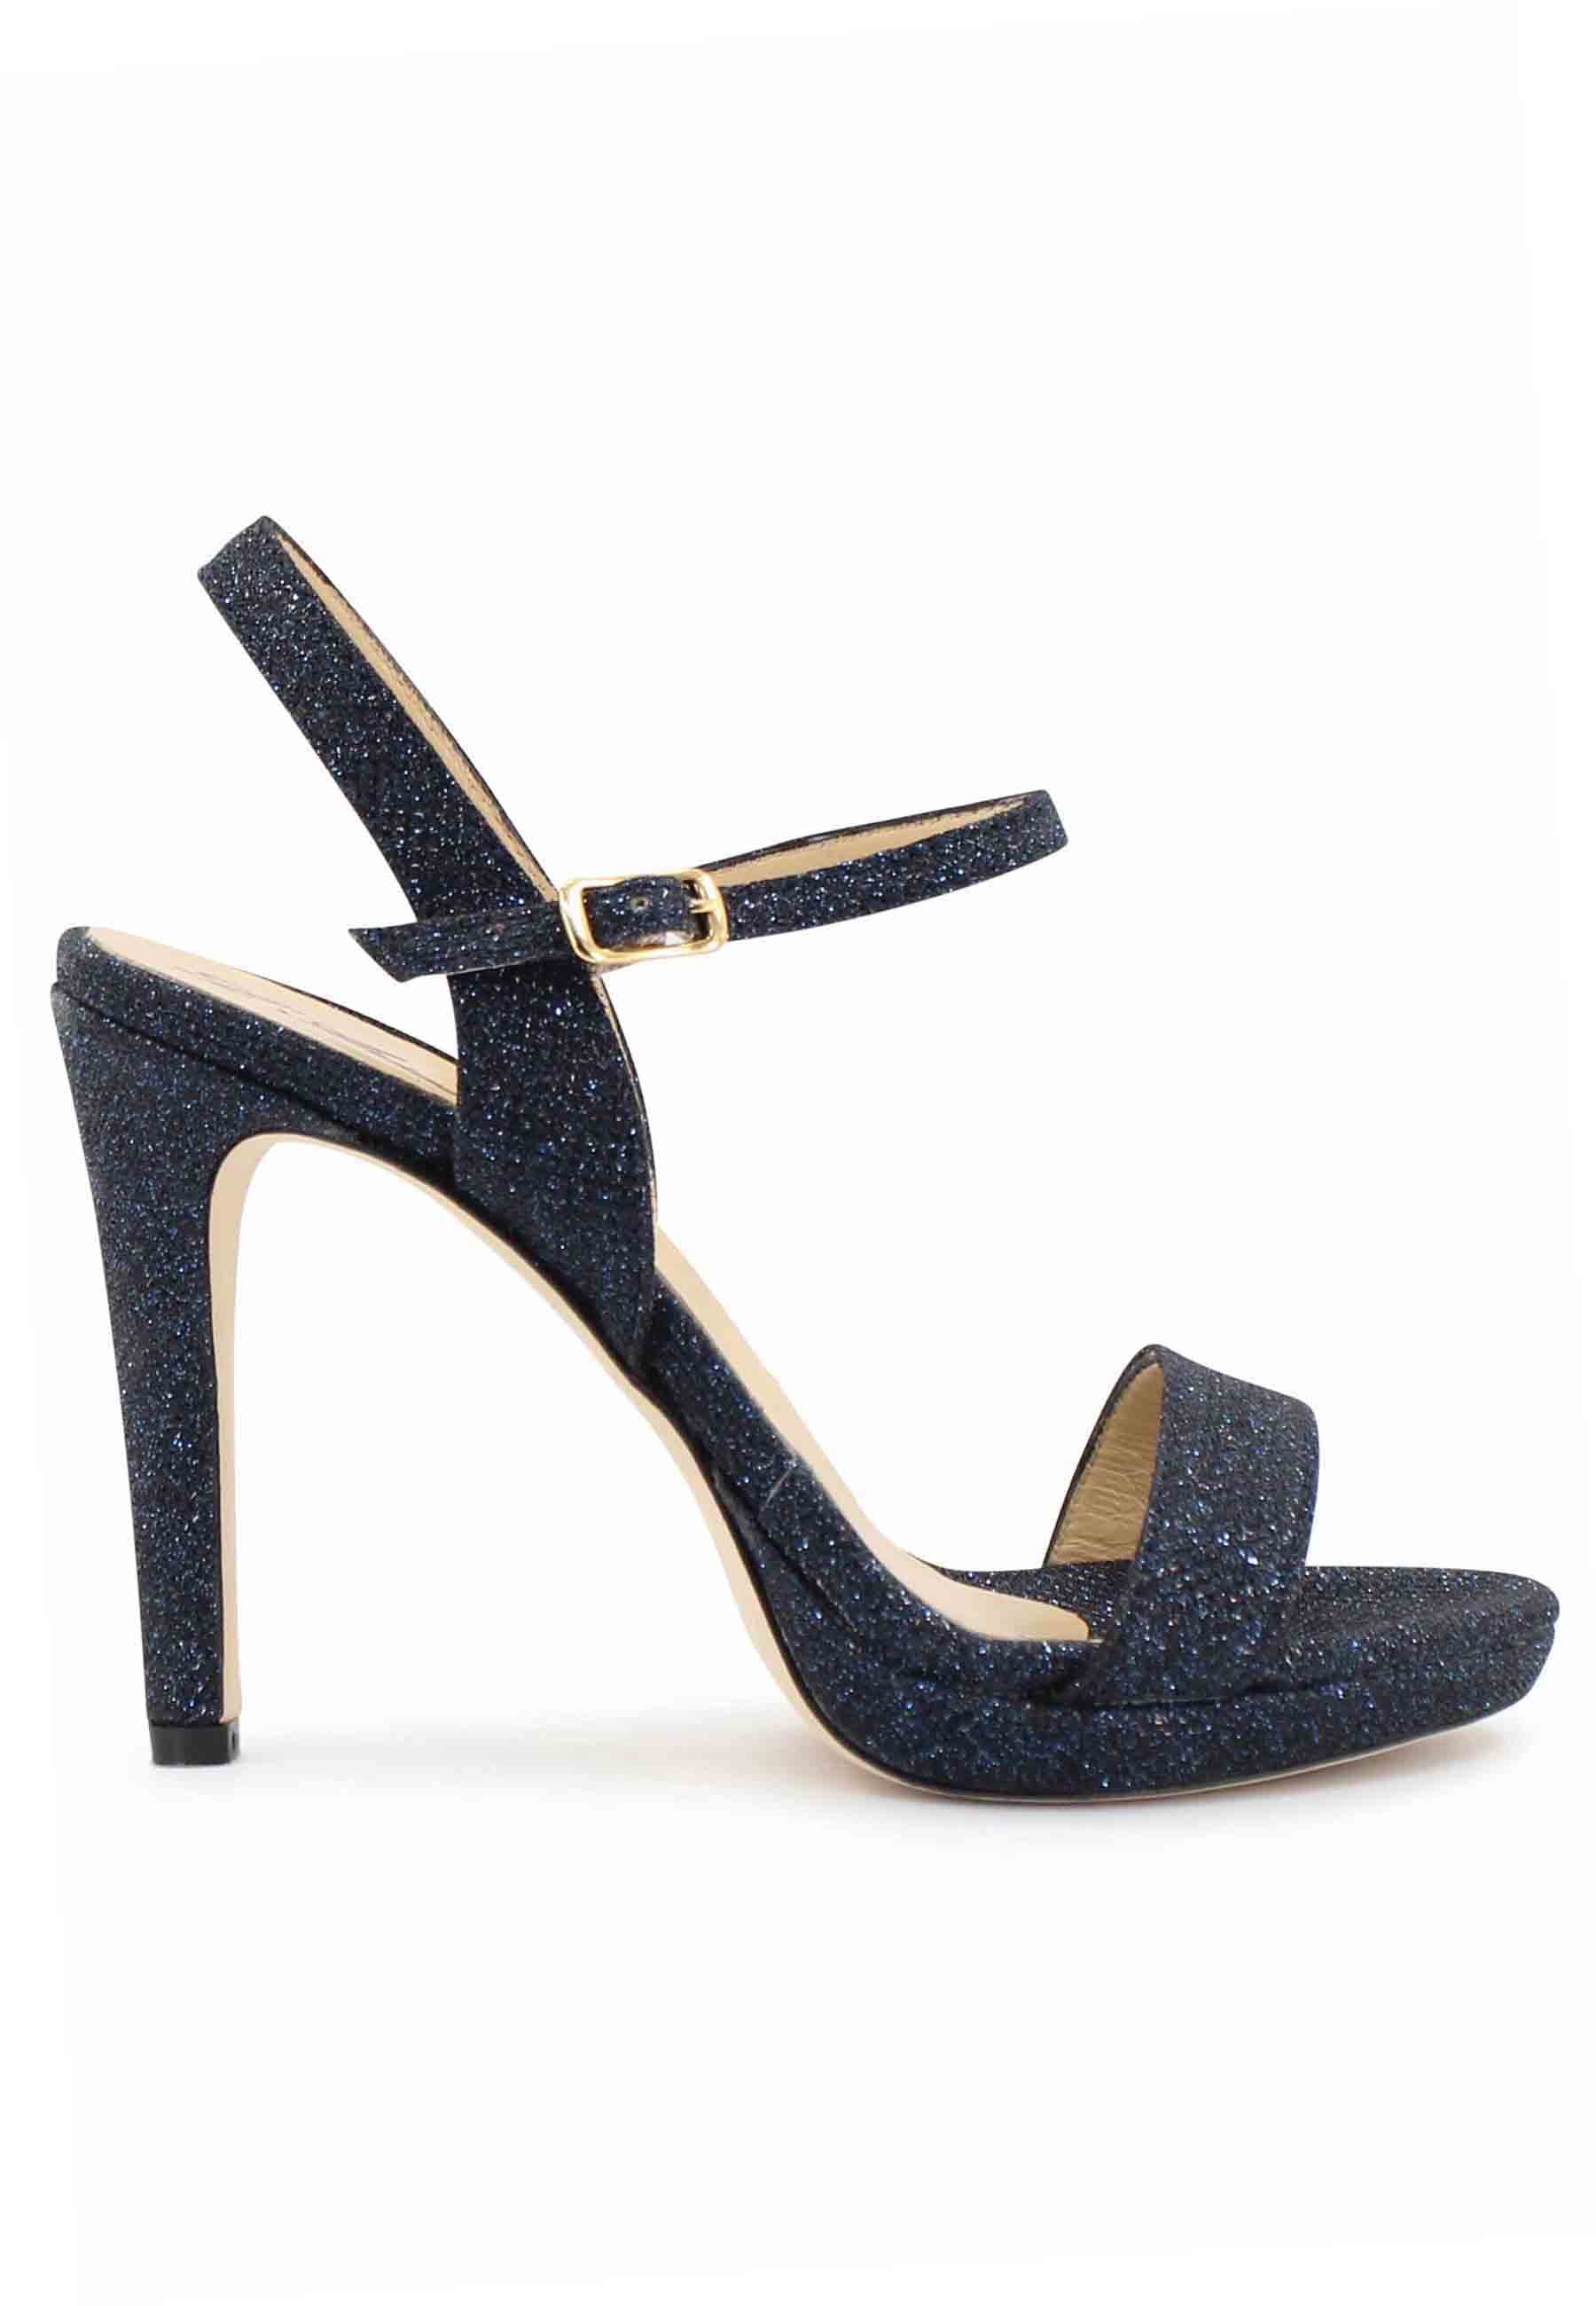 Women's blue glitter sandals with high heel and ankle strap